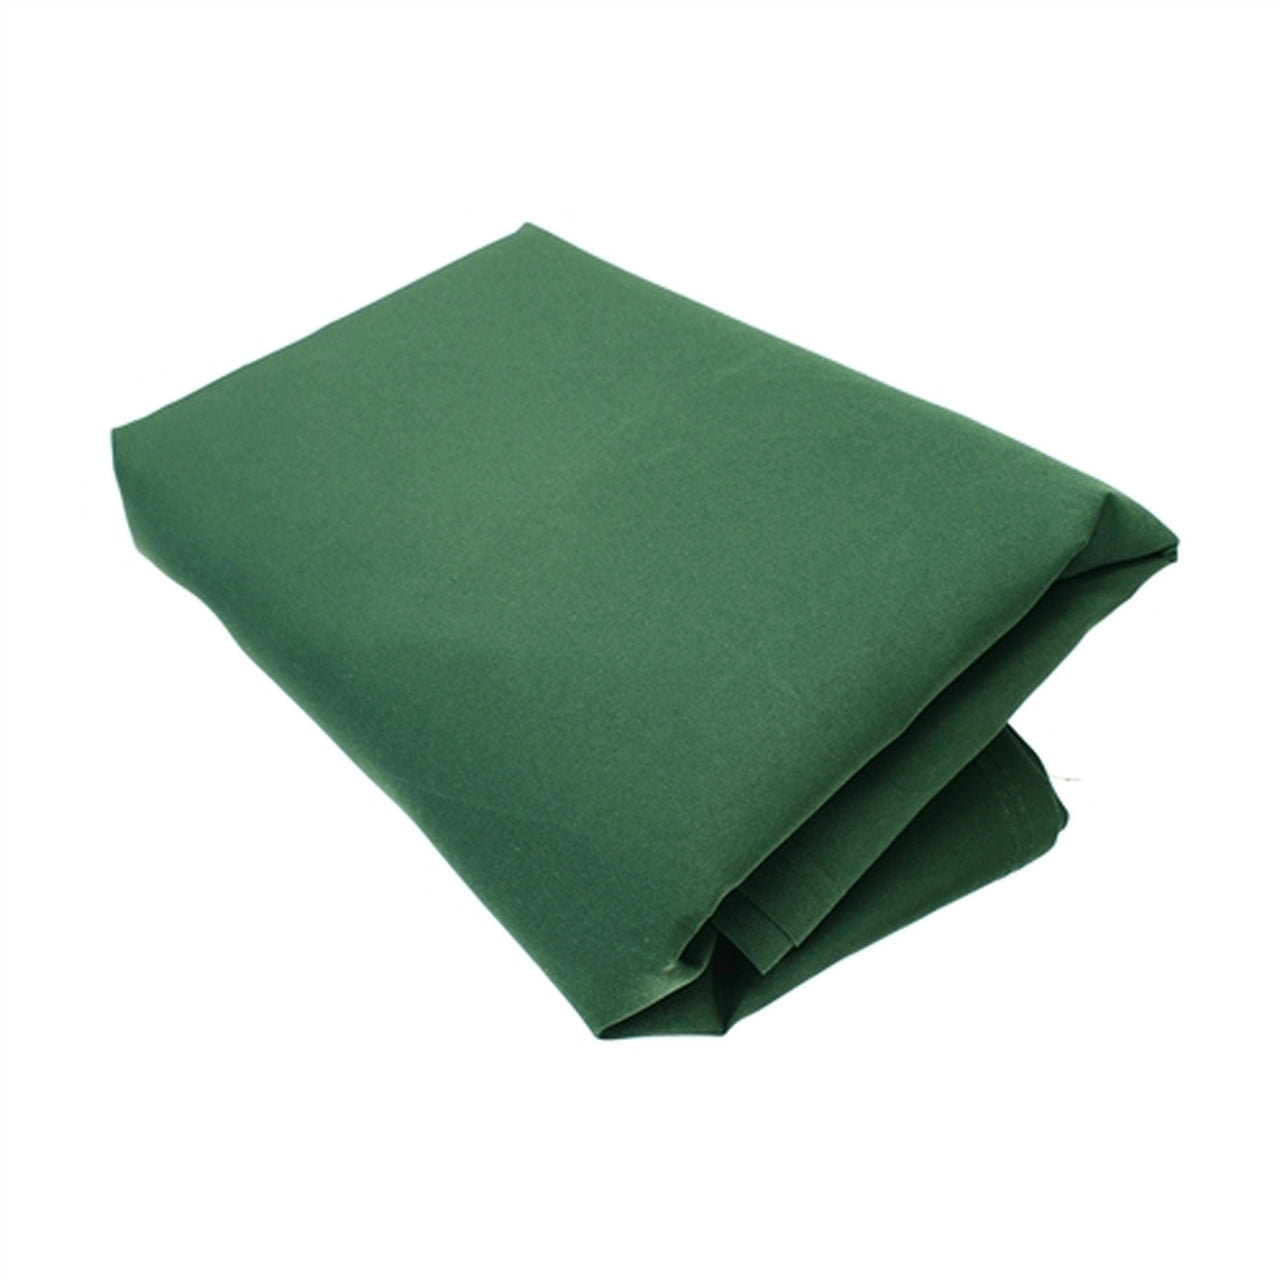 Aleko Protective Awning Cover - 12 x 10 Feet - Green